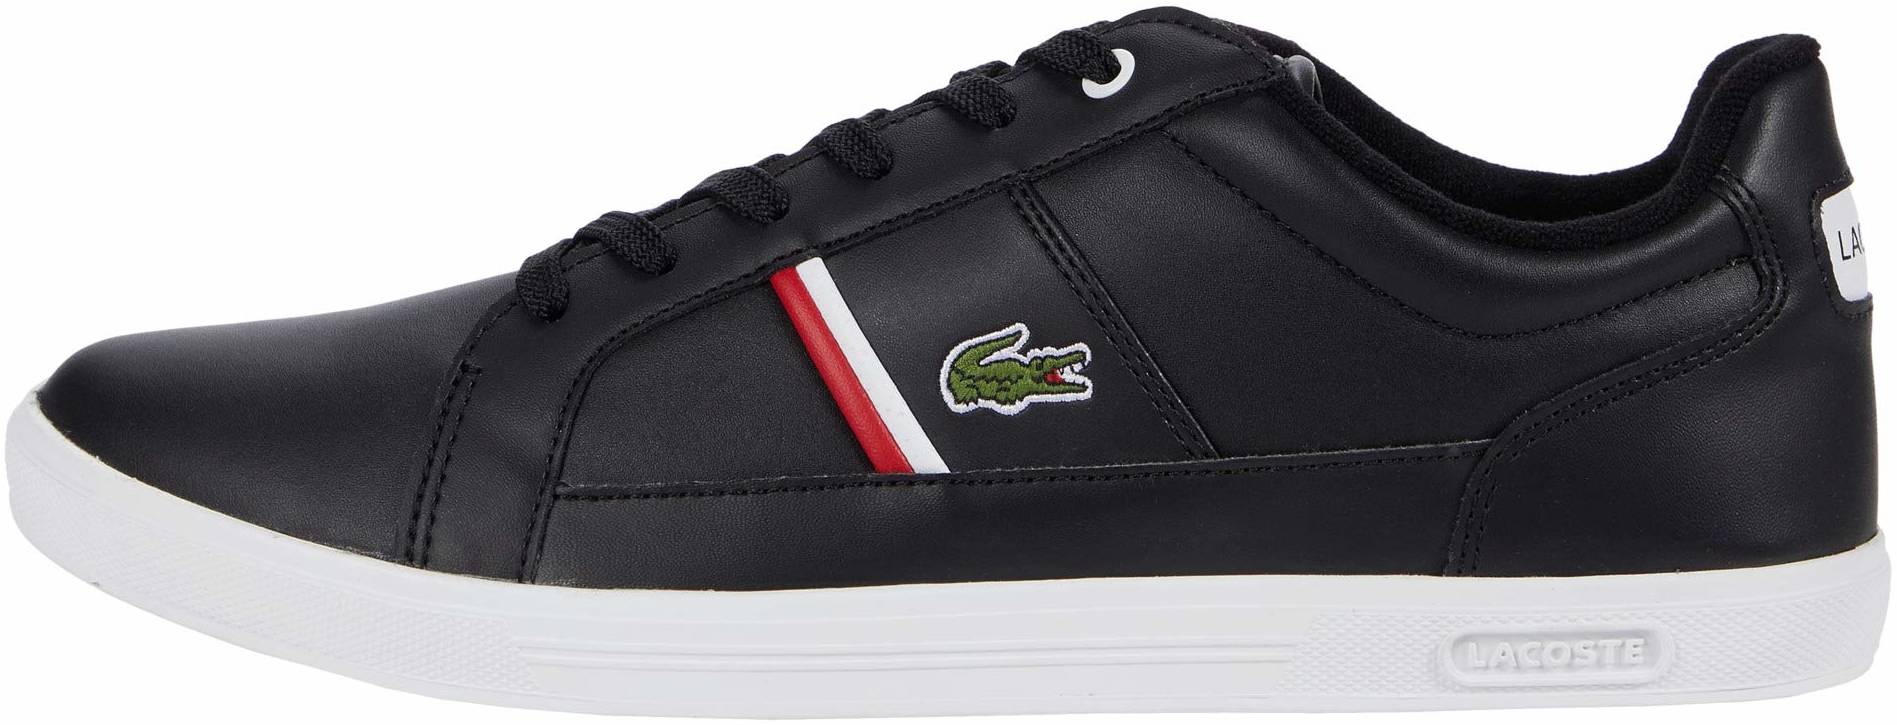 Lacoste Mens Europa Leather Navy Trainers 7-32SPM24098F7 RRP £80.00 13/141 